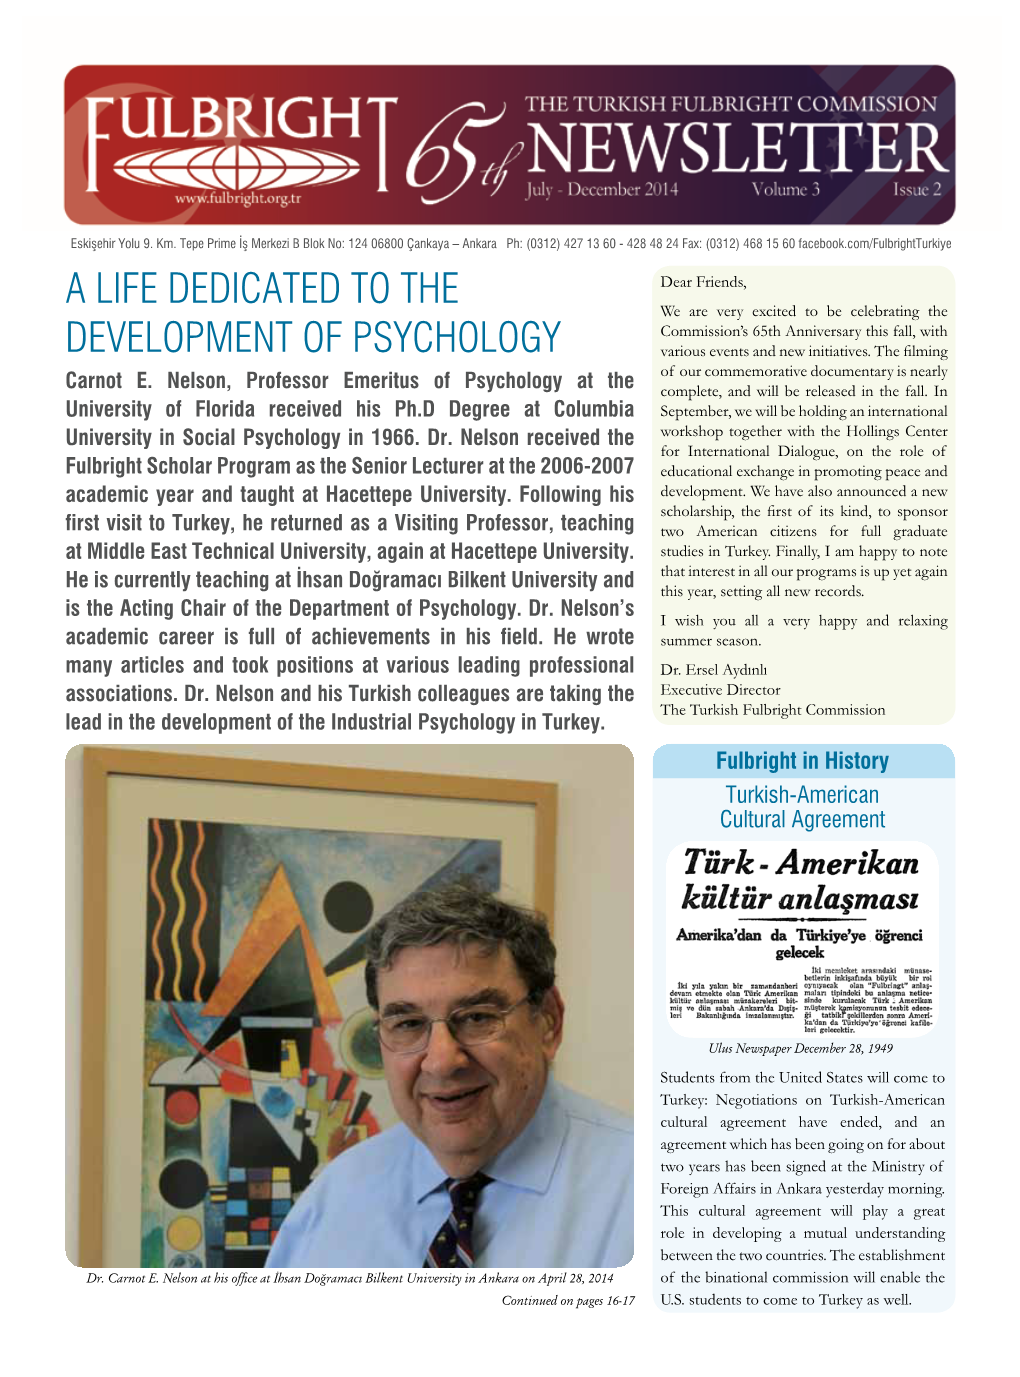 A Life Dedicated to the Development of Psychology